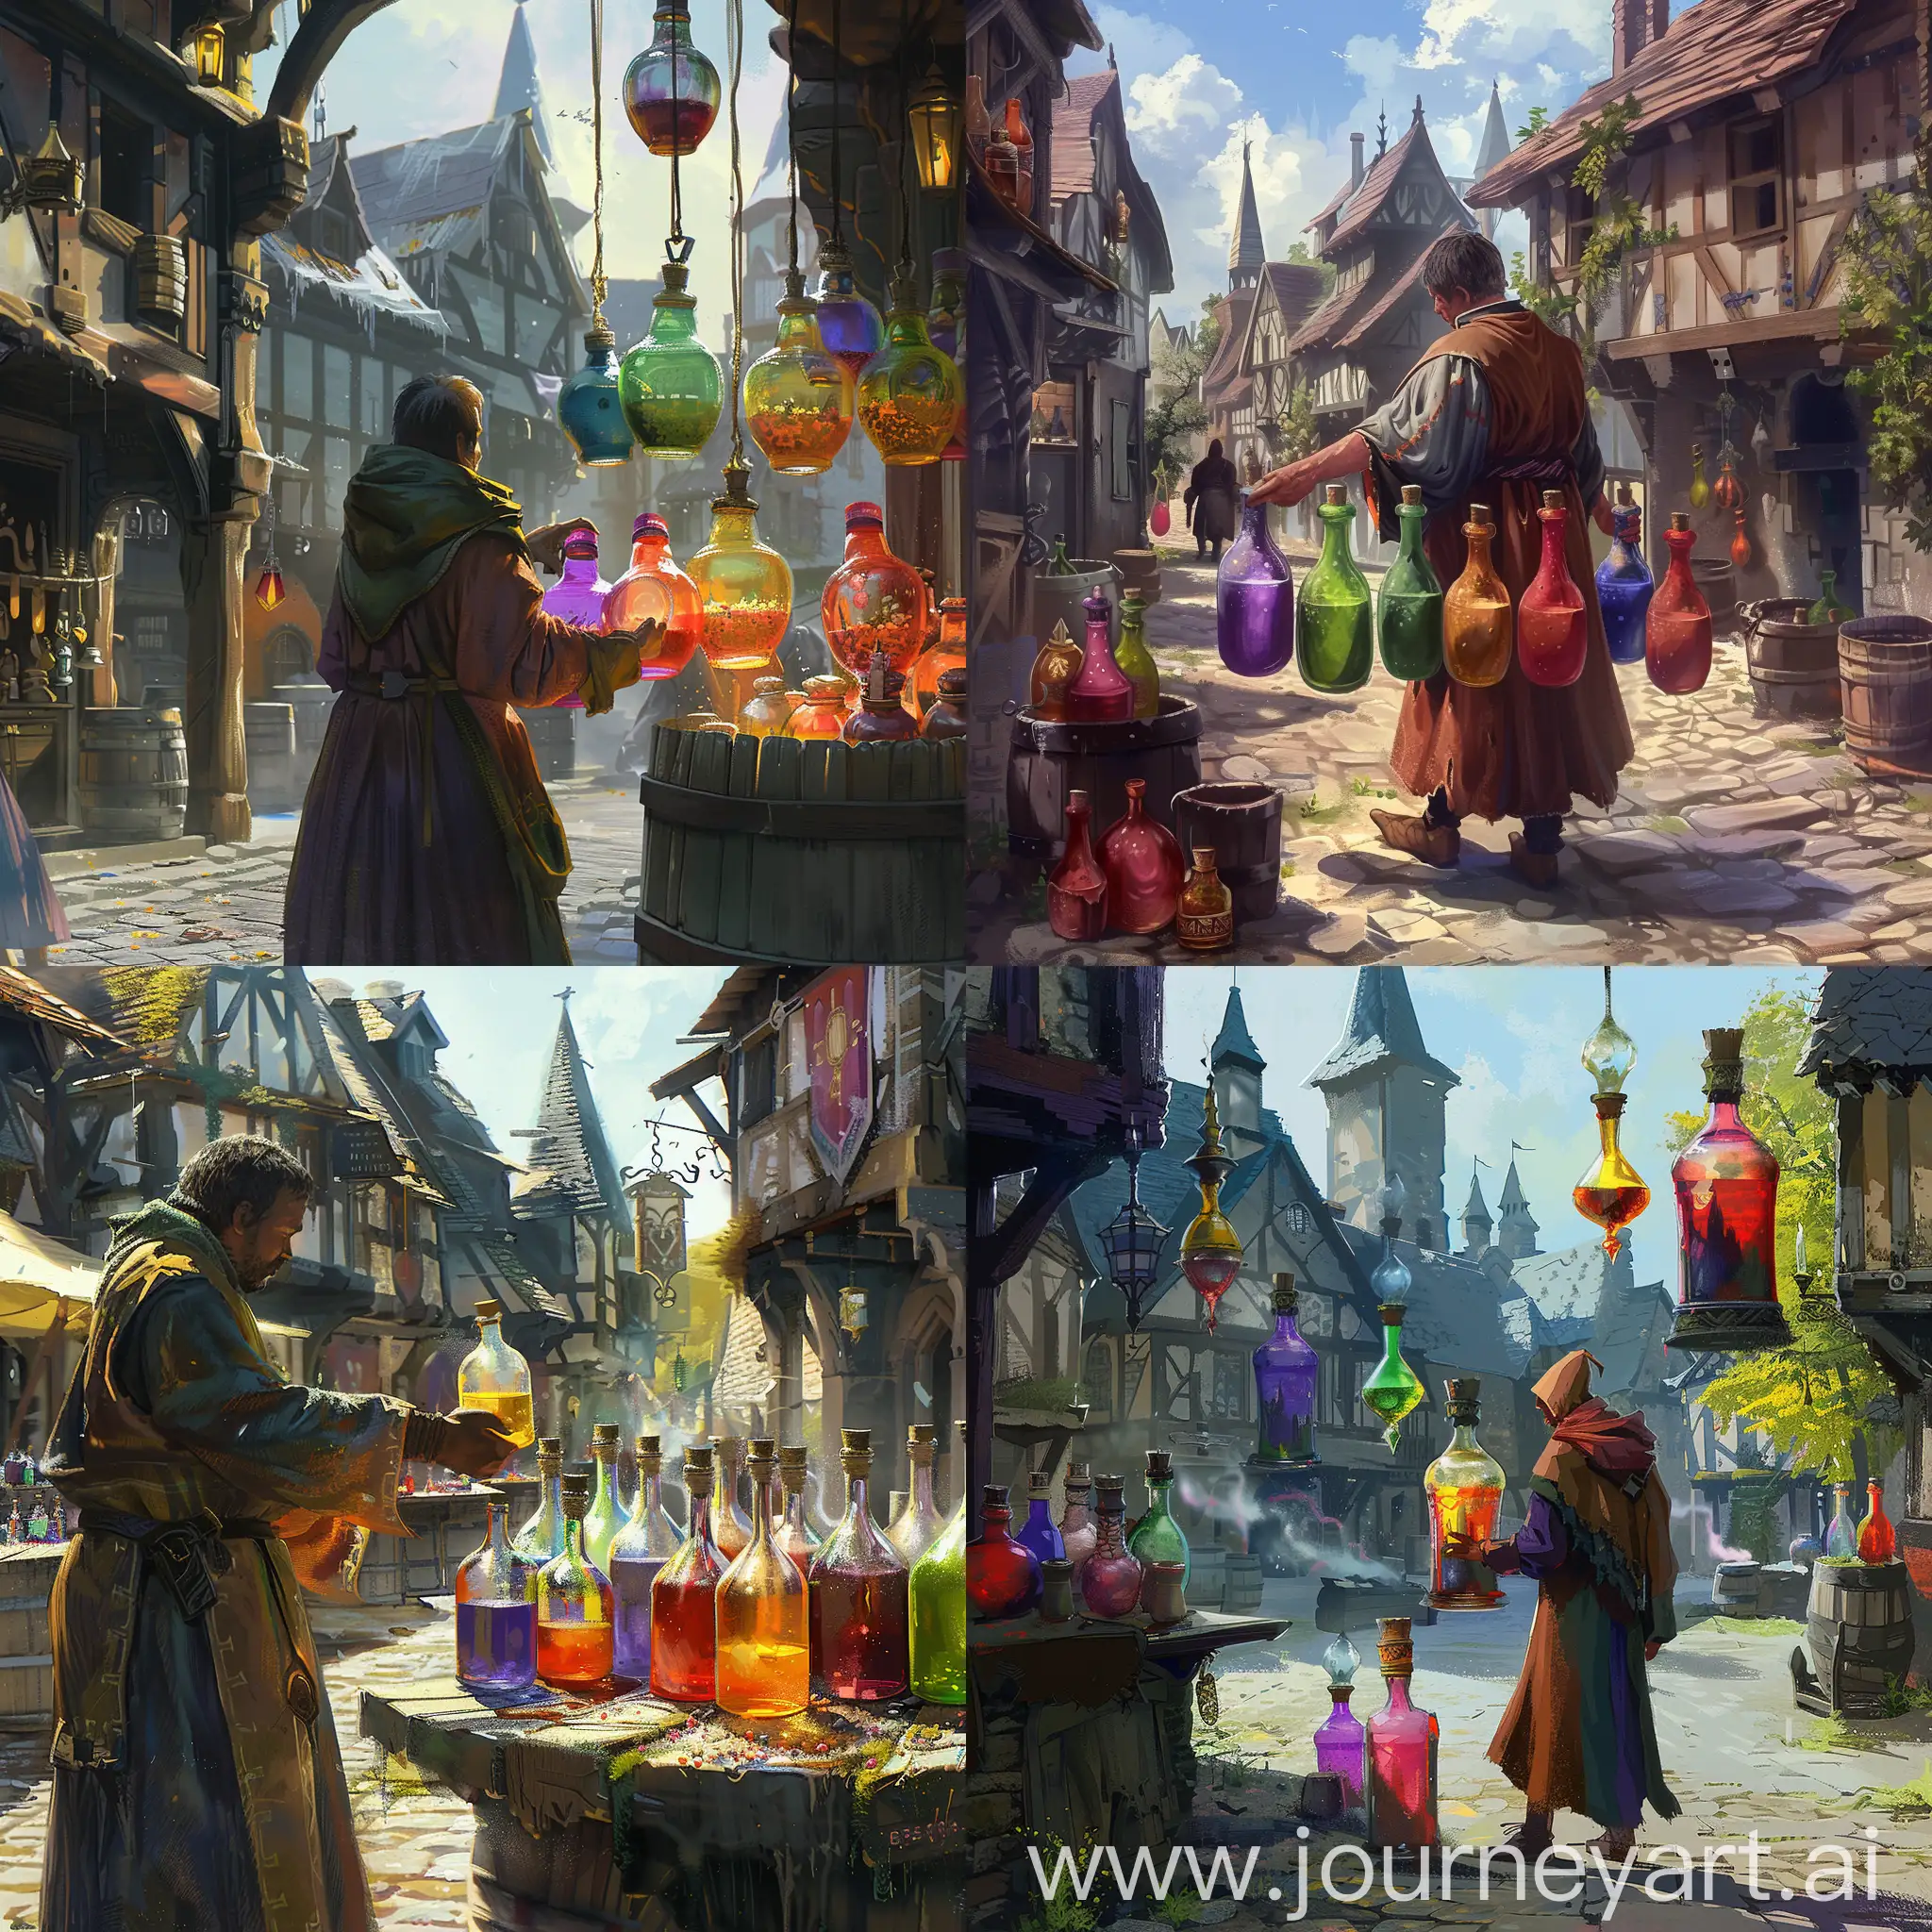 Medieval-Fantasy-Peasant-Buying-Vibrant-Potions-in-Oddly-Shaped-Bottles